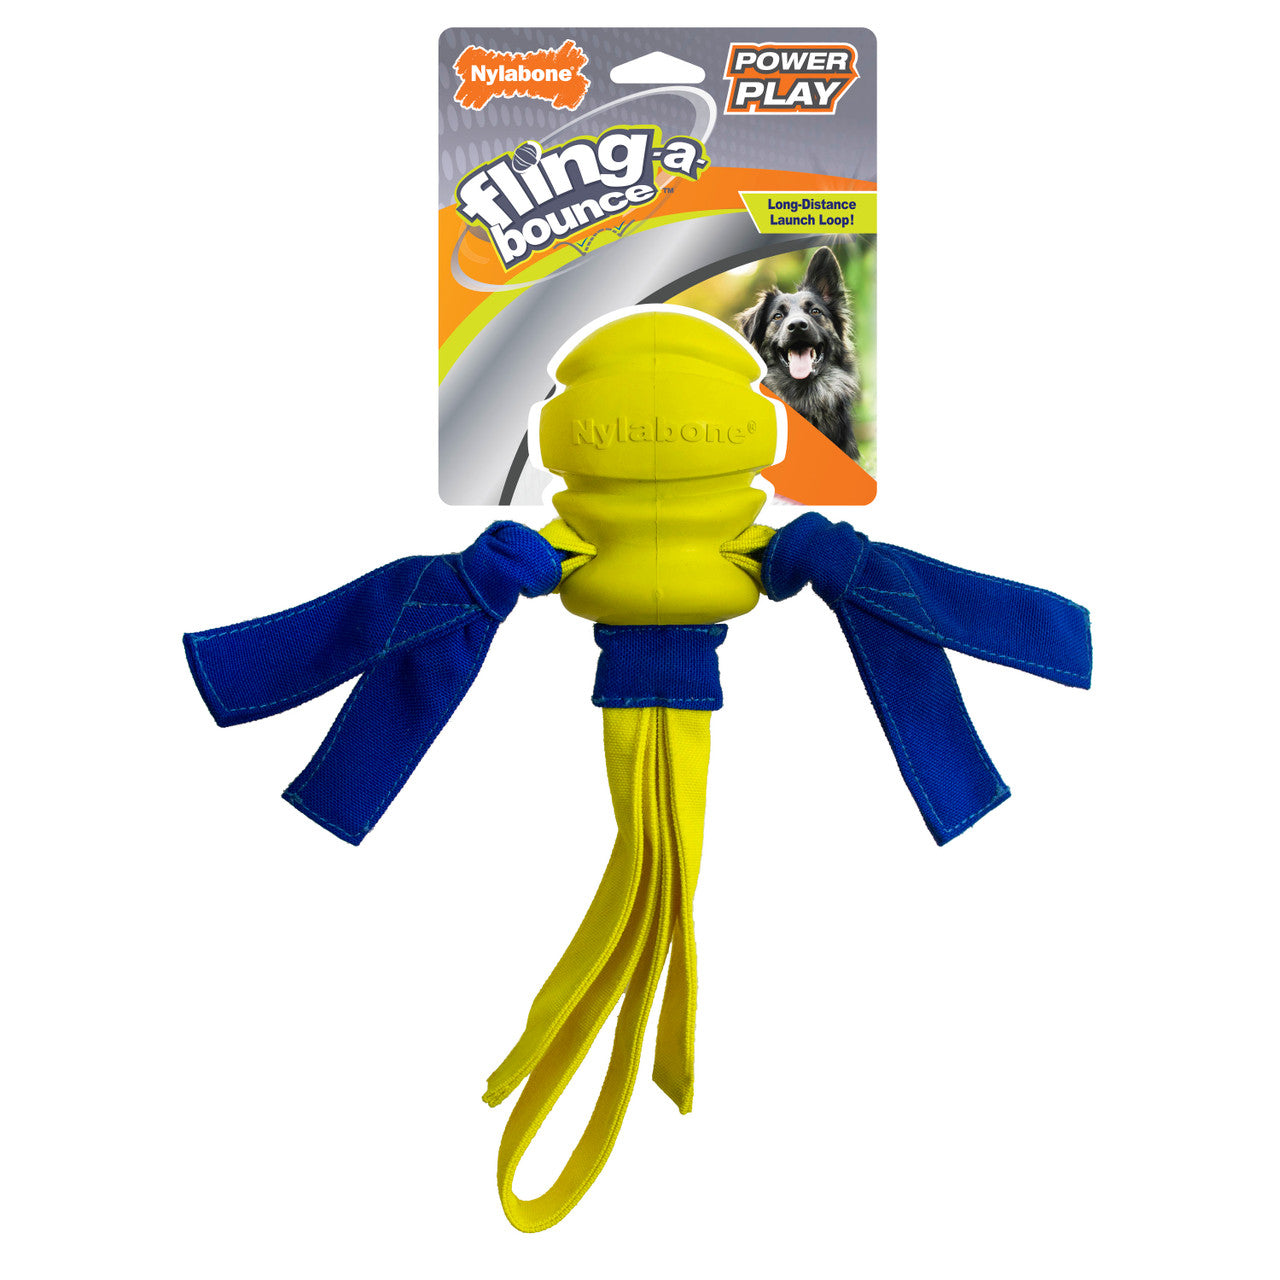 Nylabone Power Play Dog Fetch Toys Fling-a-Bounce Large (1 Count)